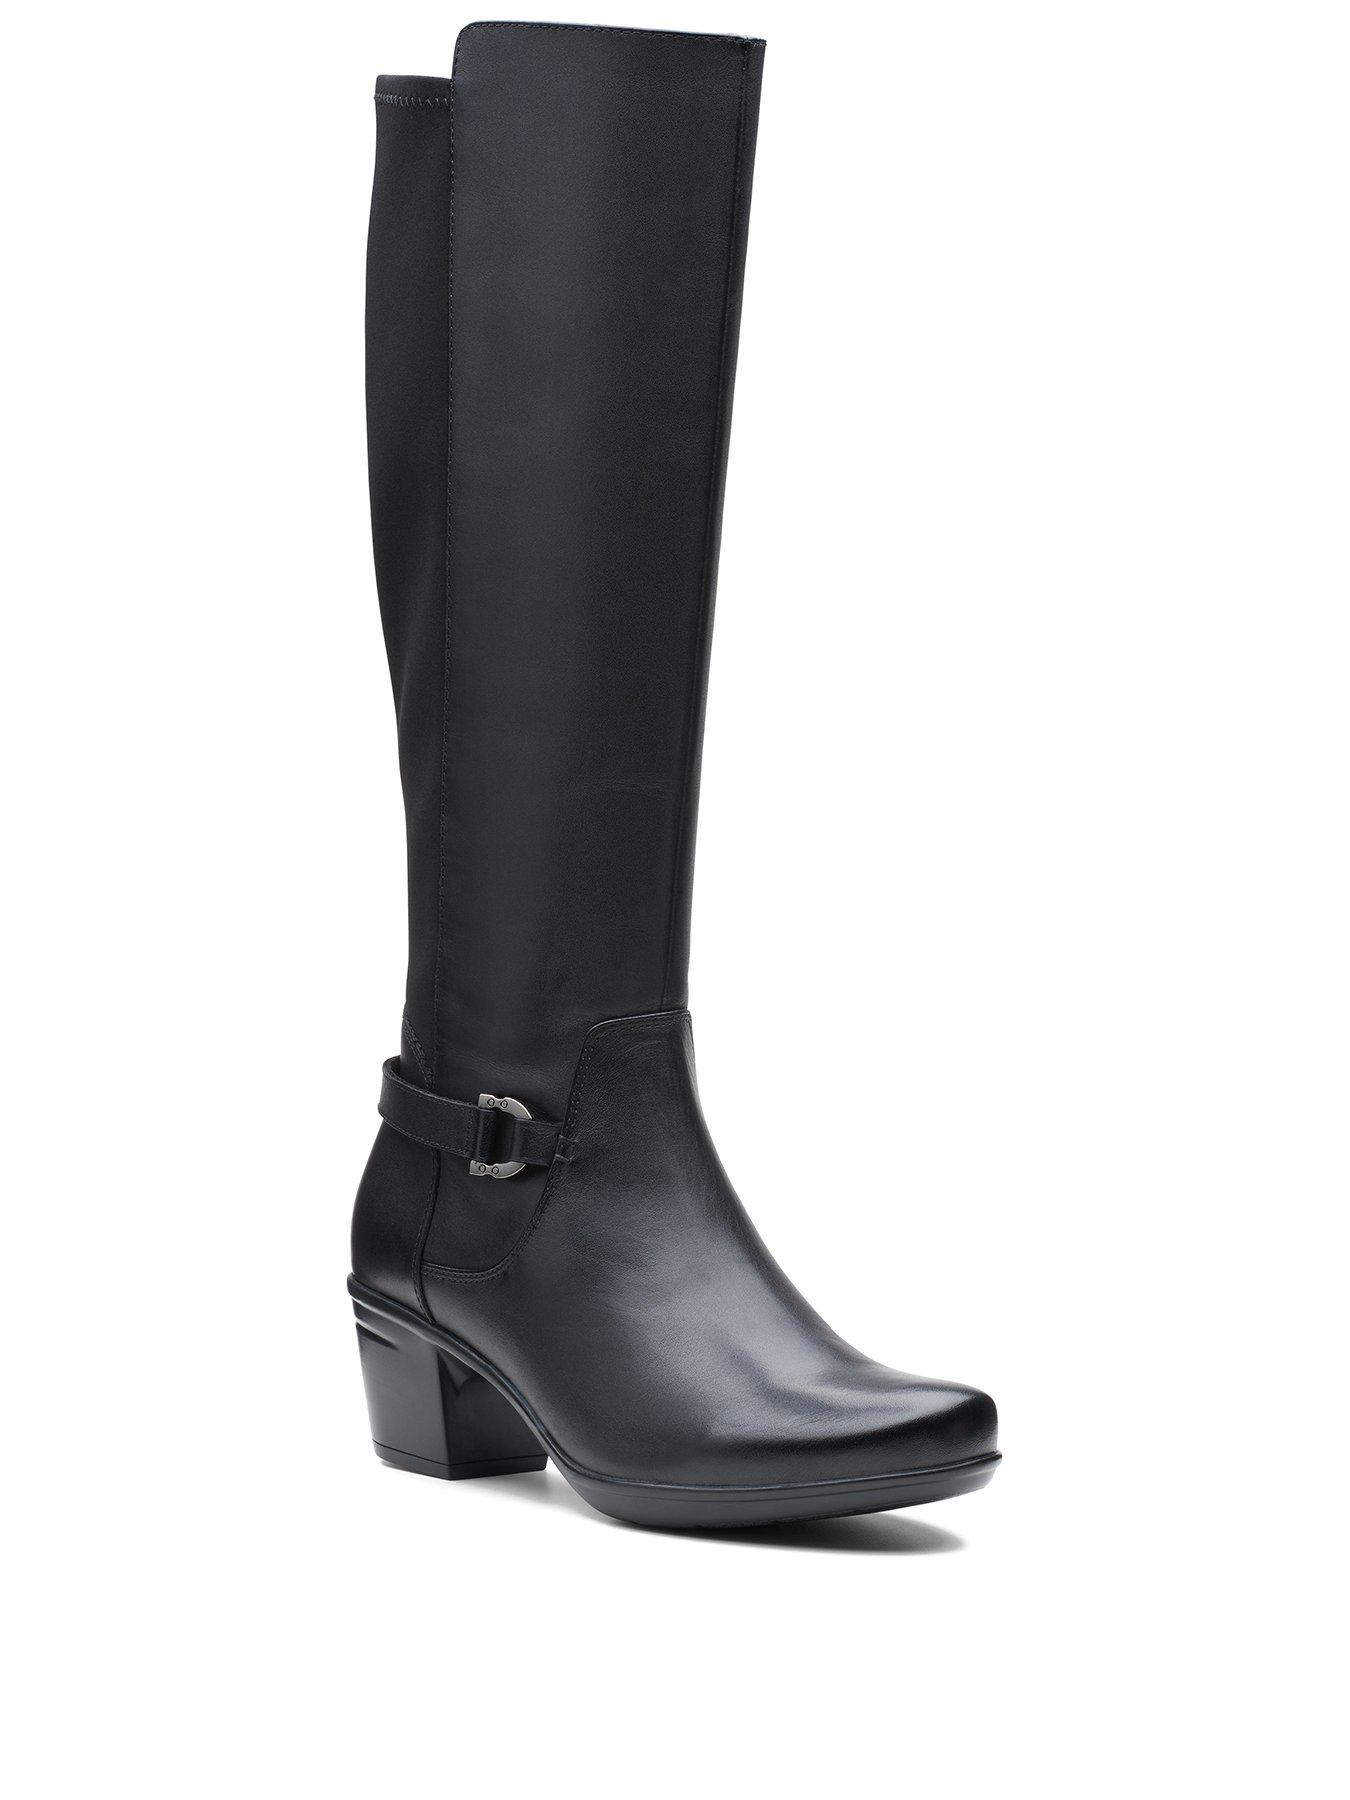 clarks wedge knee high boots